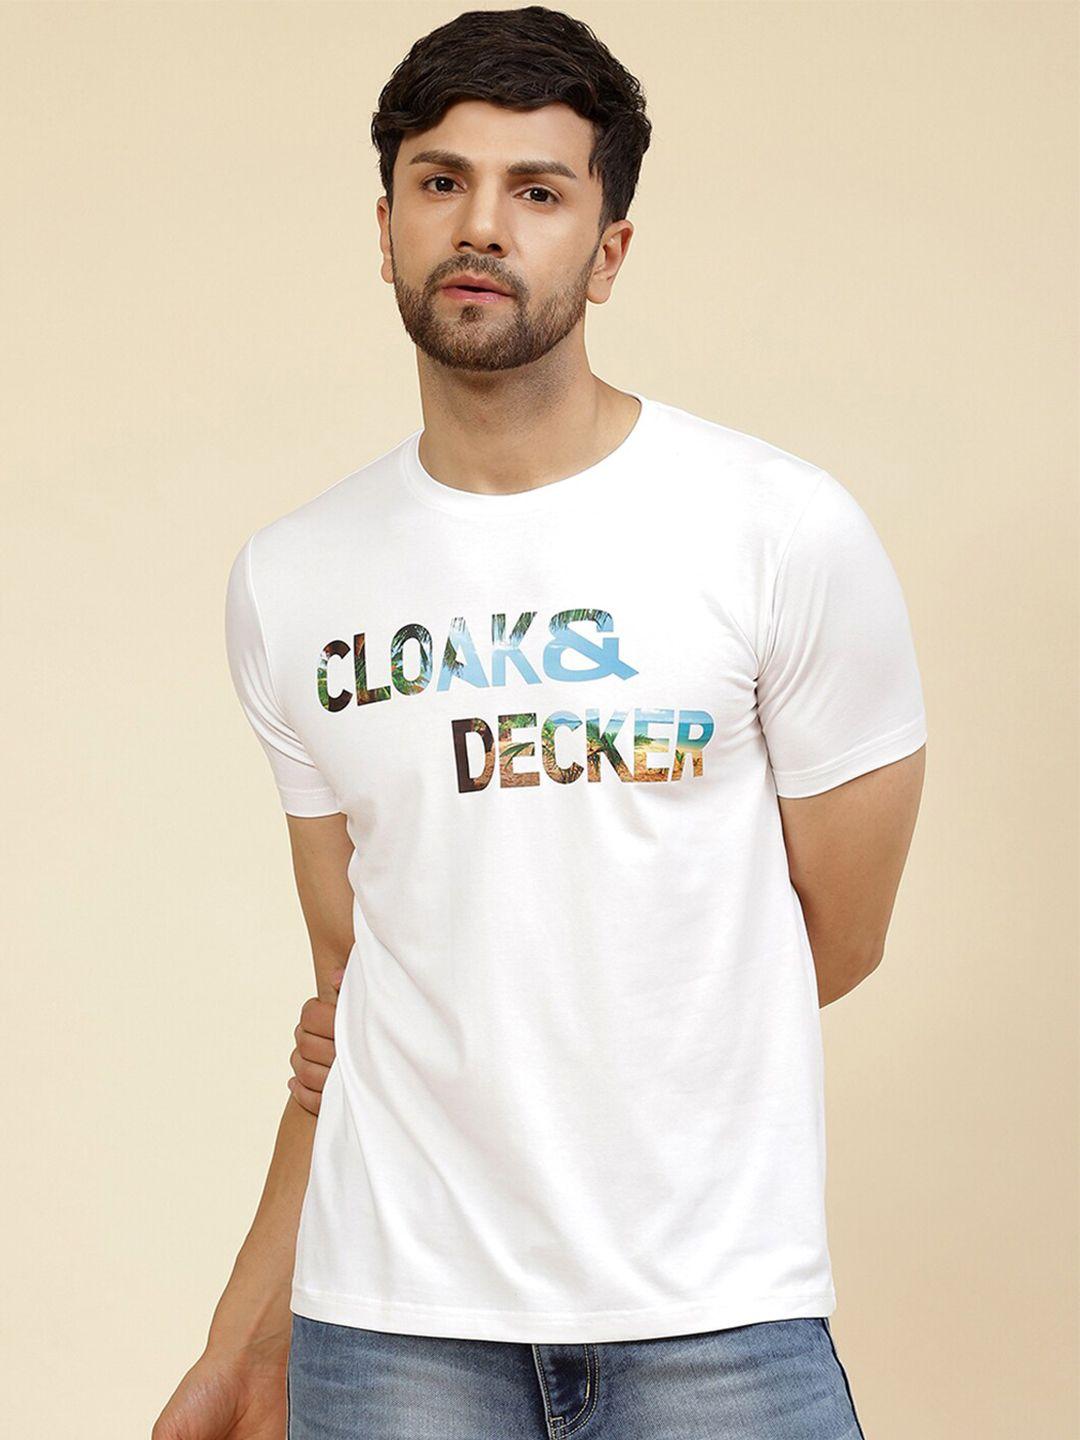 cloak-&-decker-by-monte-carlo-typography-printed-cotton-t-shirt